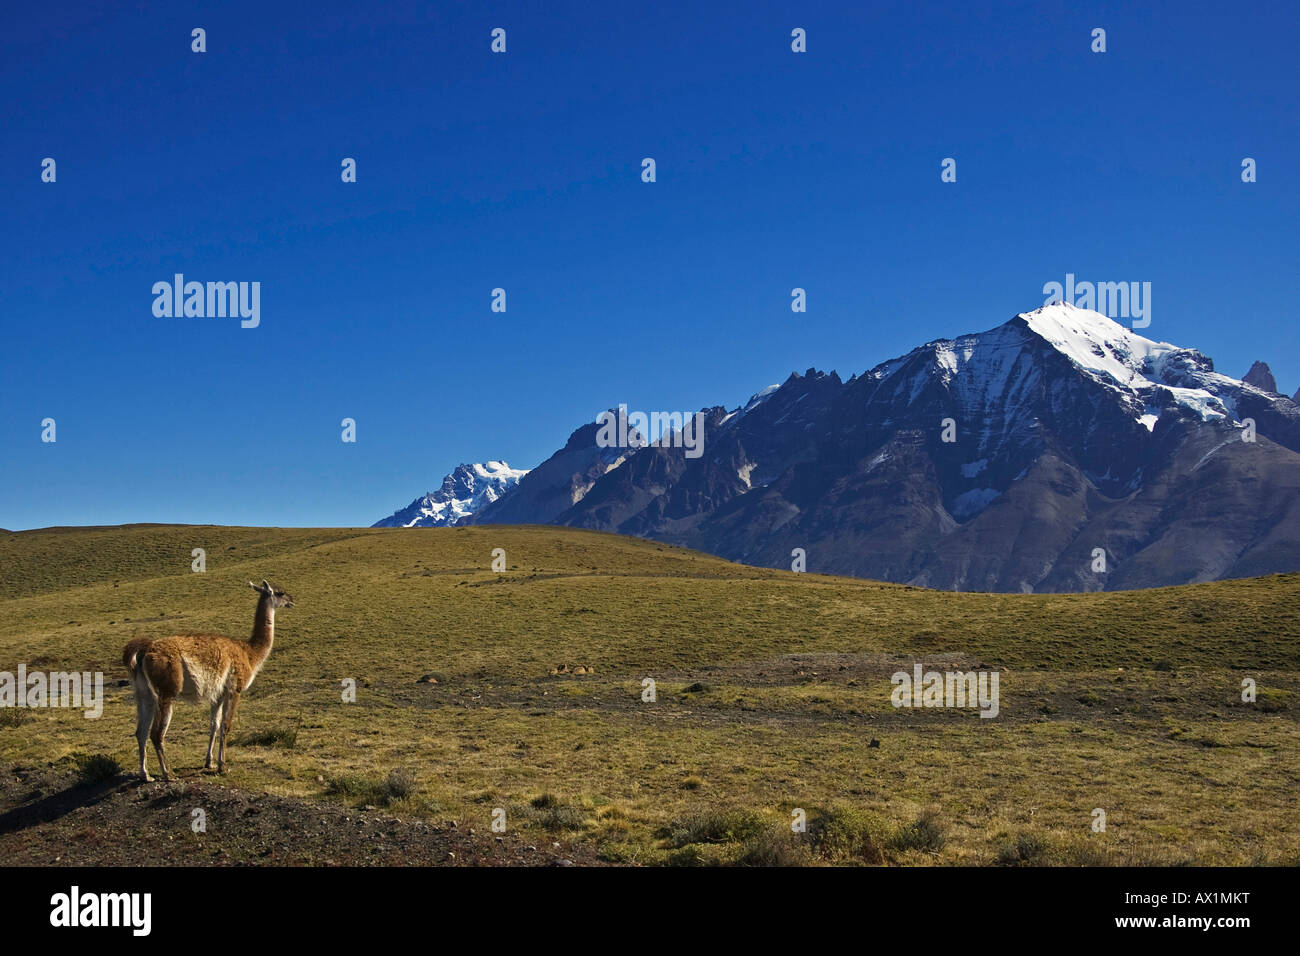 Guanaco (Lama guanicoe), National Park Torres del Paine, Patagonia, Chile, South America Stock Photo